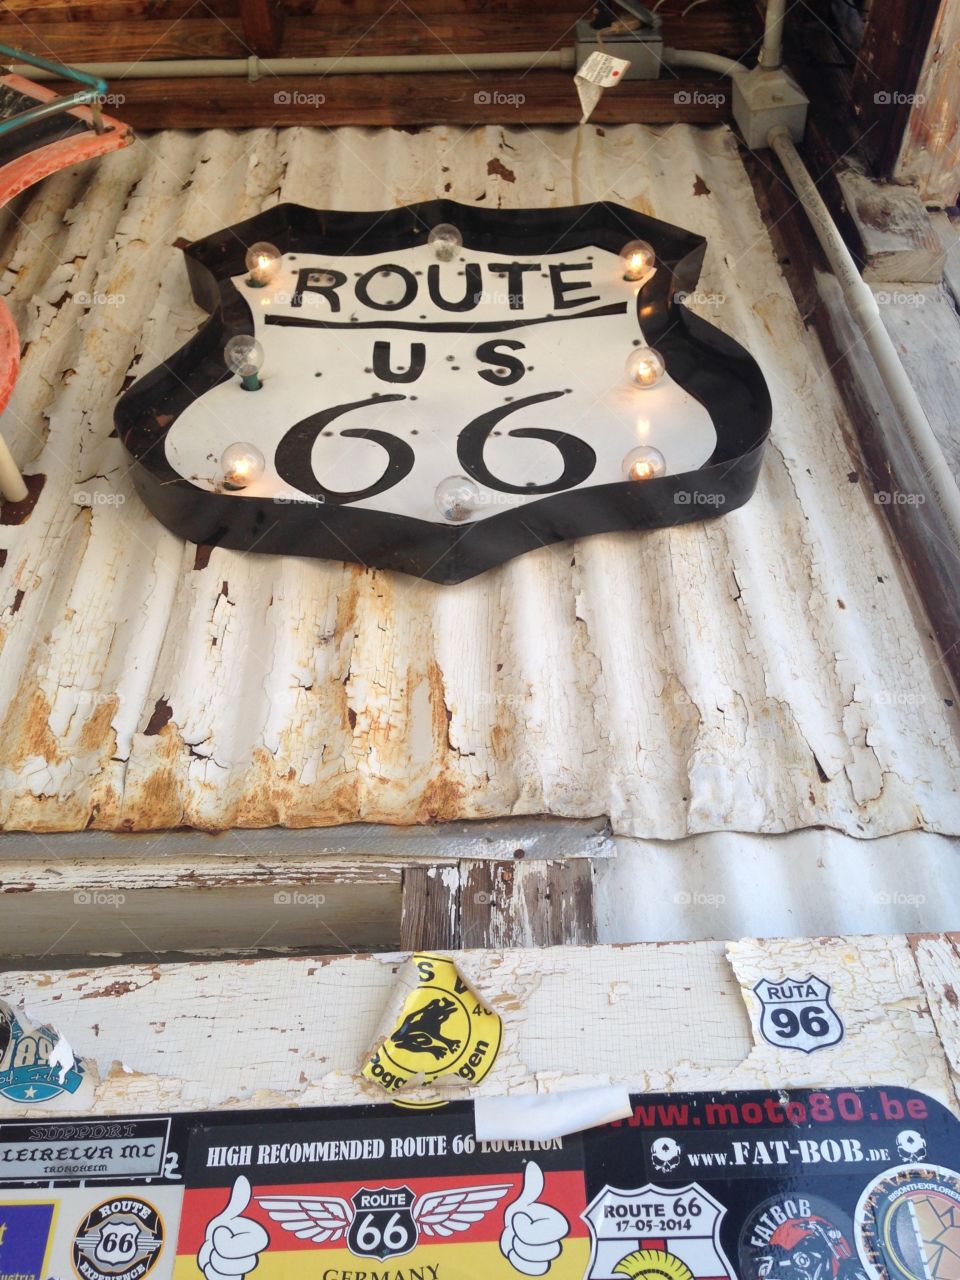 Route 66 decaying